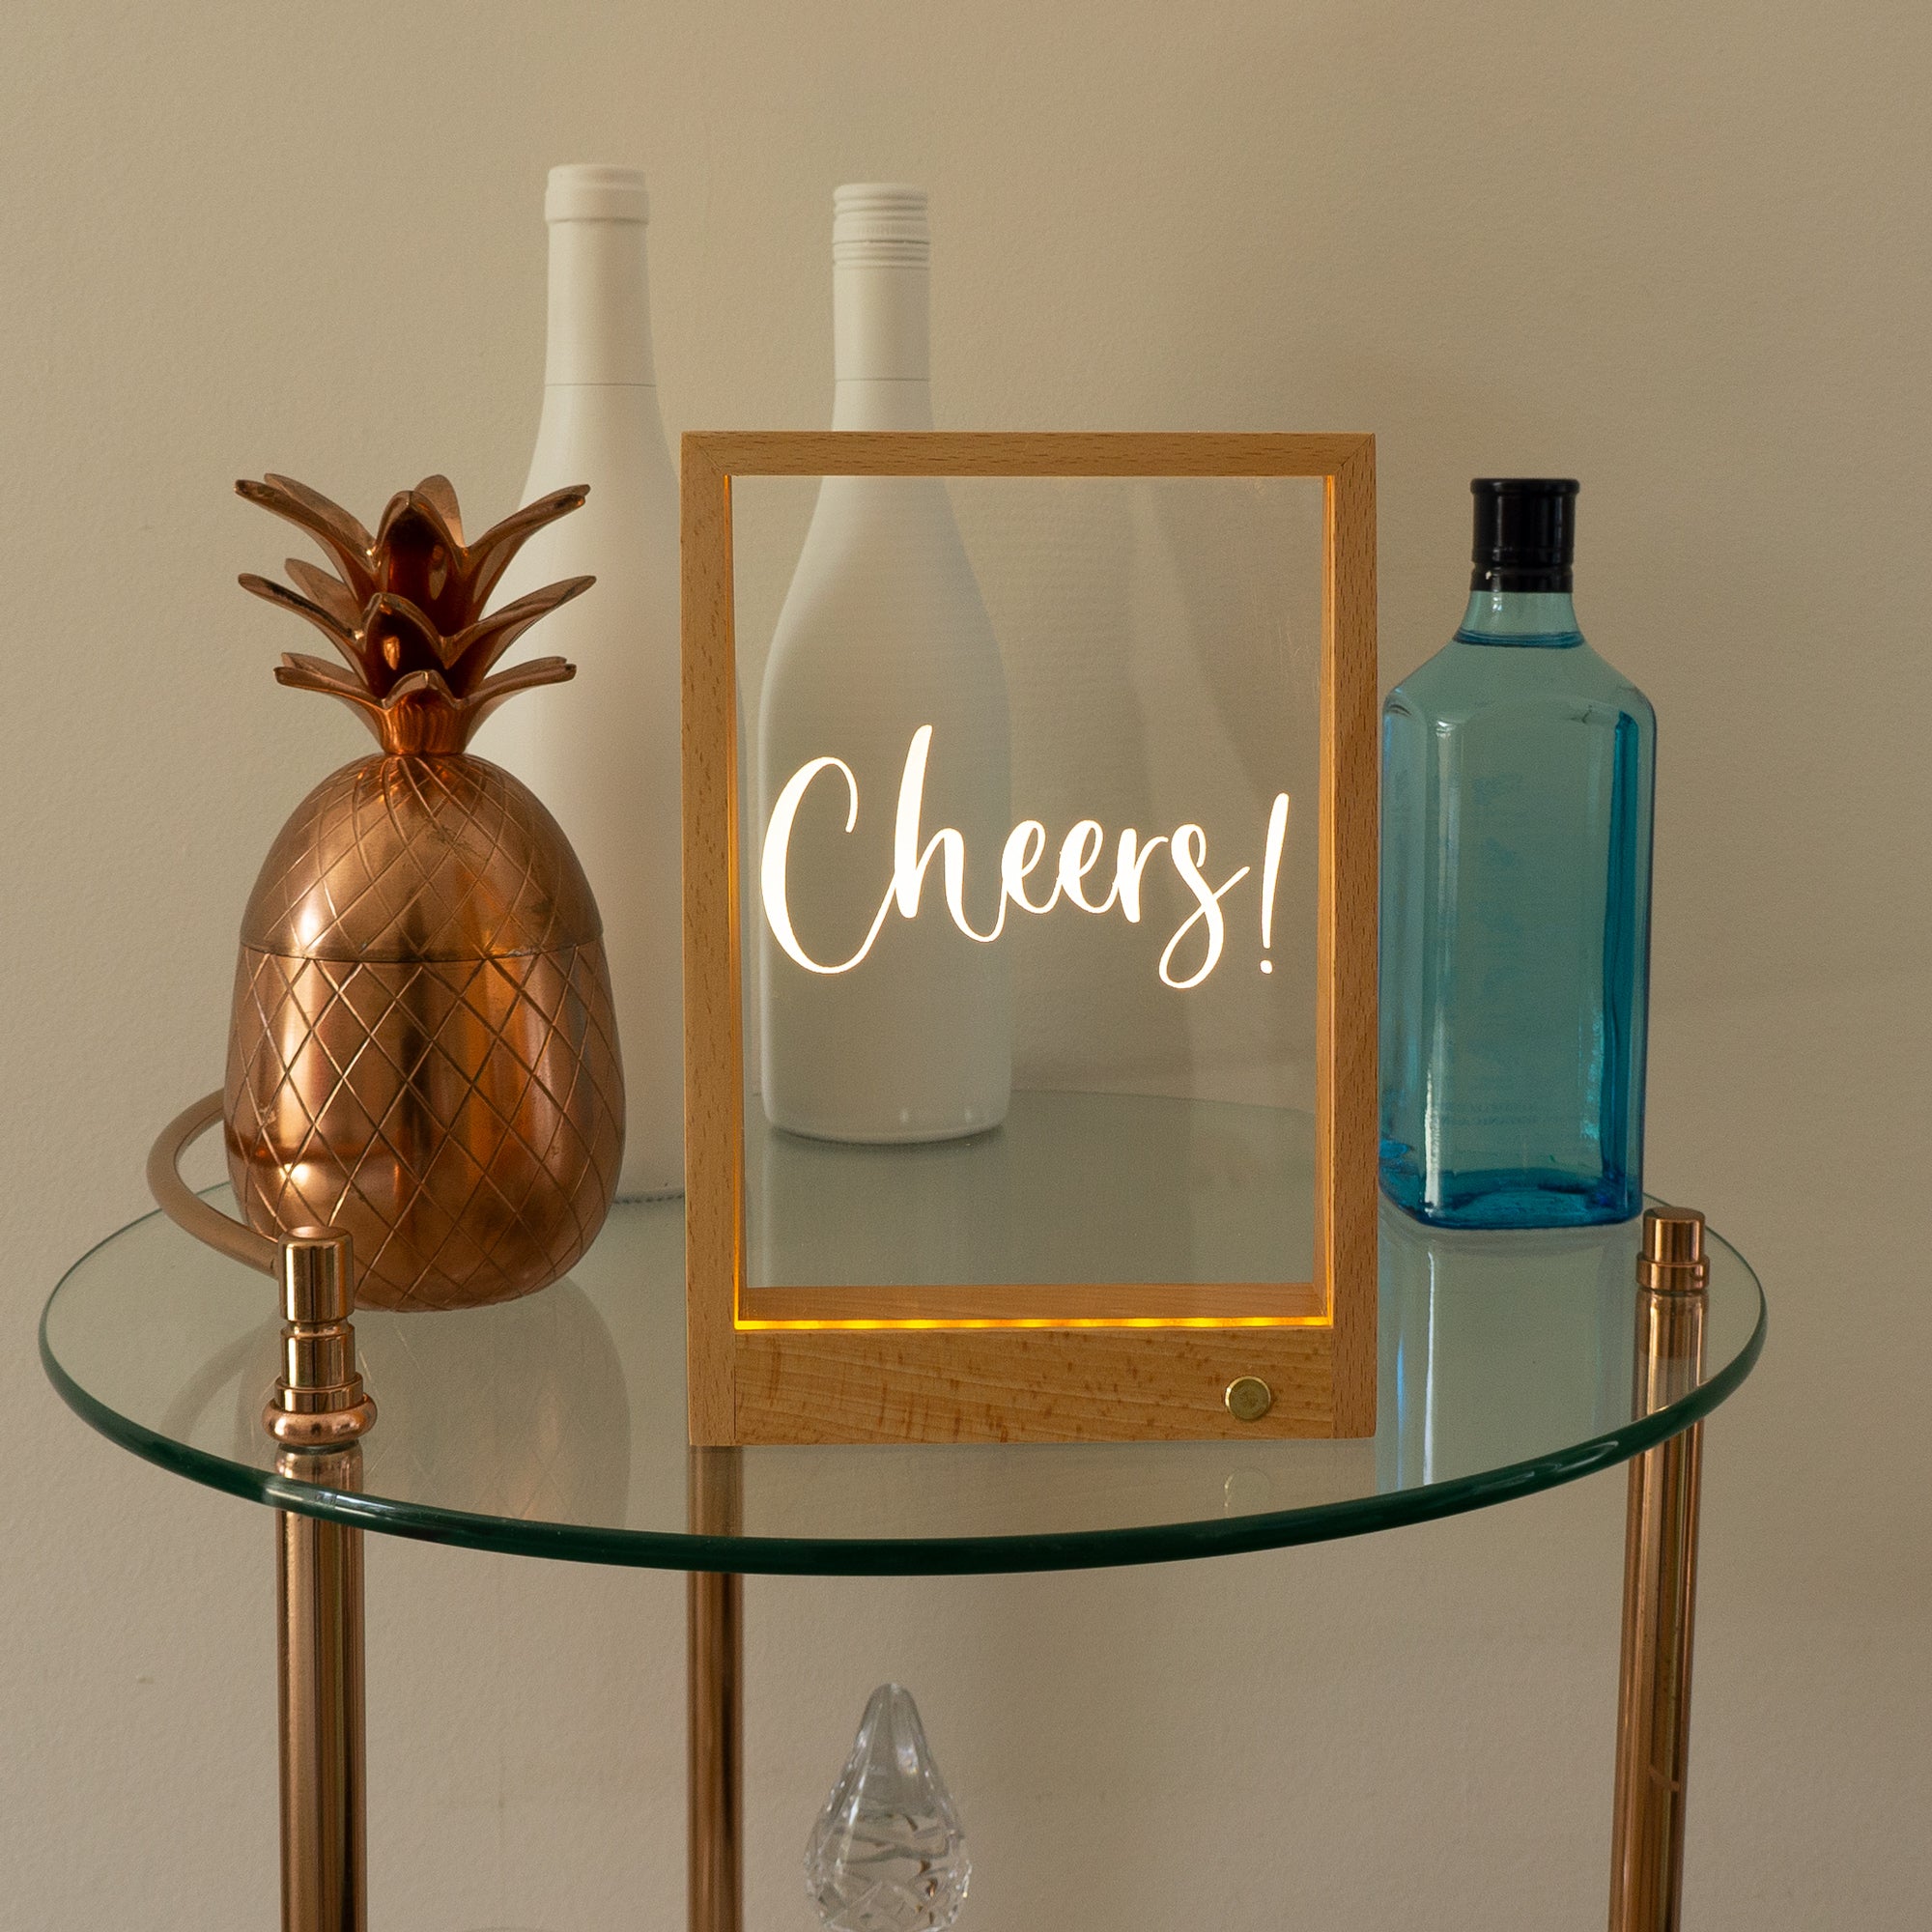 Wireless Cheers! light up LED quote bar sign